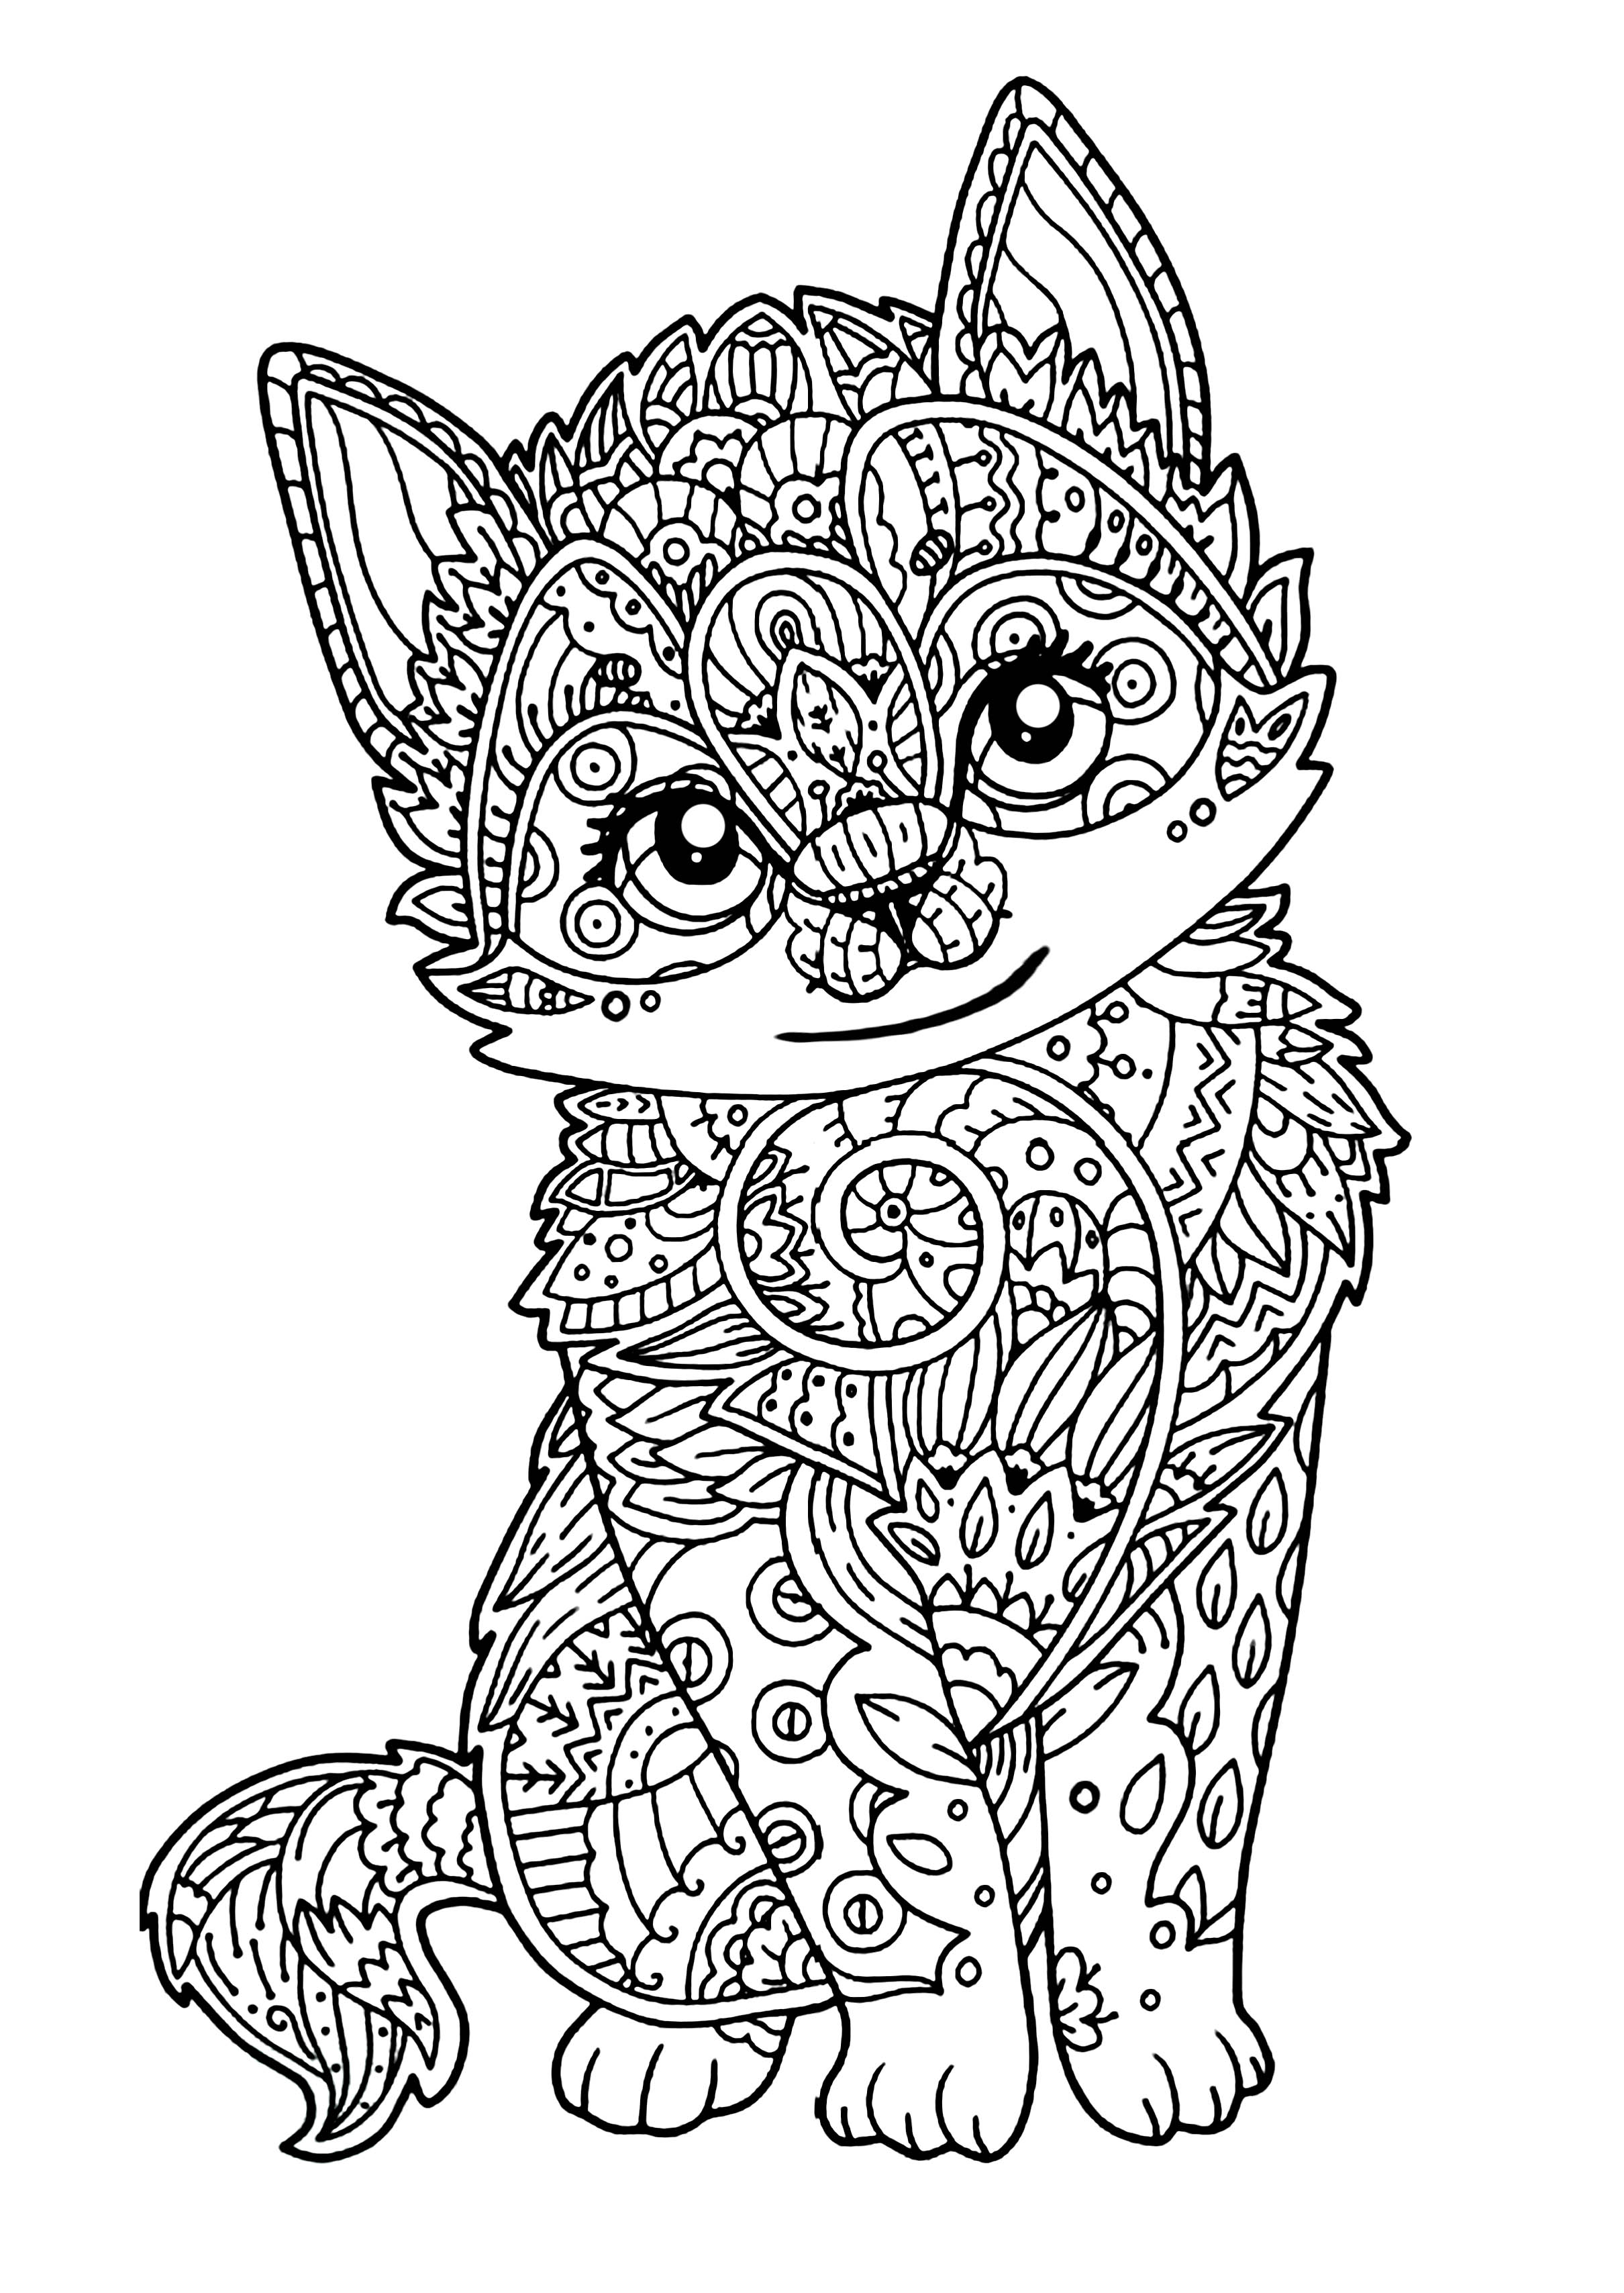 Download Free Cat Coloring Pages For Adults Coloring And Drawing